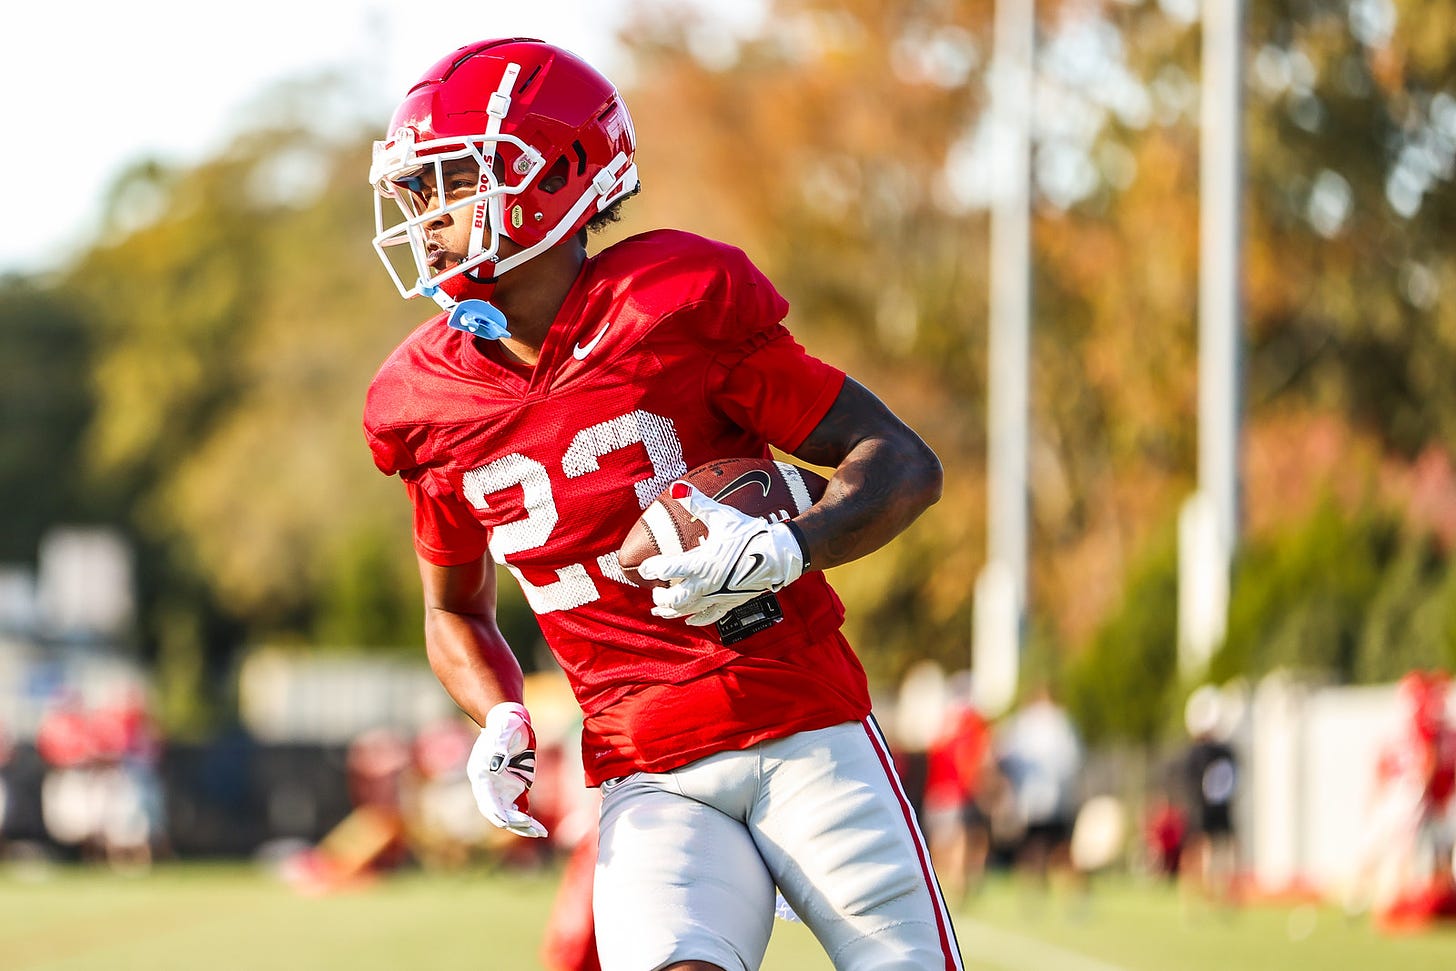 Georgia wide receiver Jaylen Johnson (23) during the Bulldogs’ practice session in Athens, Ga., on Tuesday, Nov. 2, 2021. (Photo by Tony Walsh)